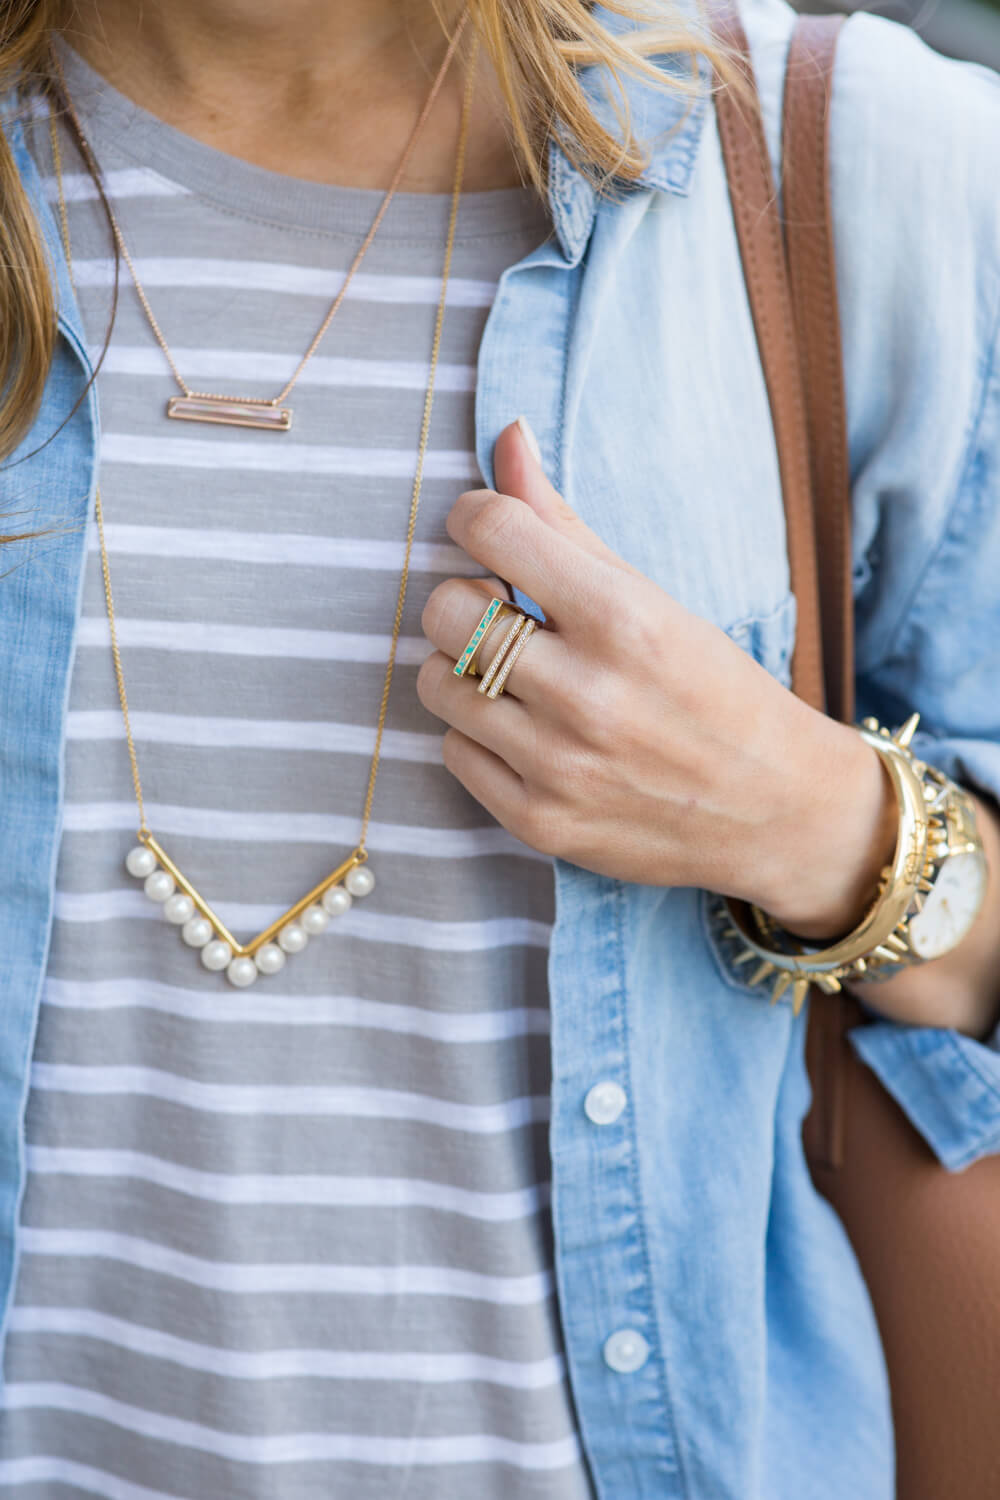 brighton the day blog detail accessories shot featuring kendra scott stacked rings, kendra scott rose gold bar necklace and baublebar long pearl necklace